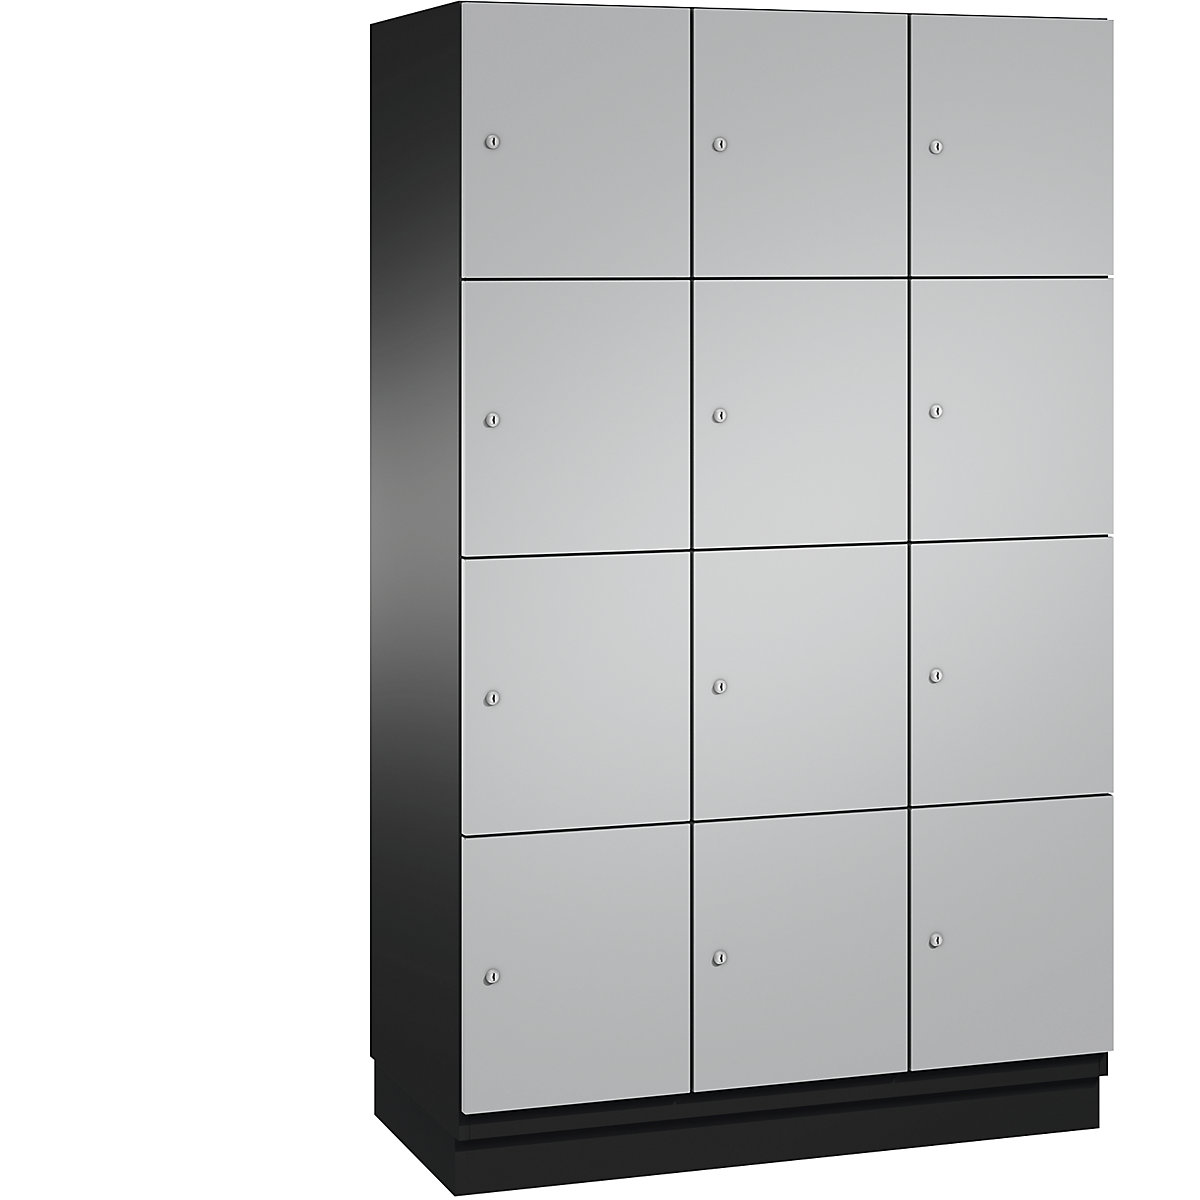 CAMBIO compartment locker with sheet steel doors – C+P, 12 compartments, width 1200 mm, body black grey / door white aluminium, compartment height 462.5 mm-10